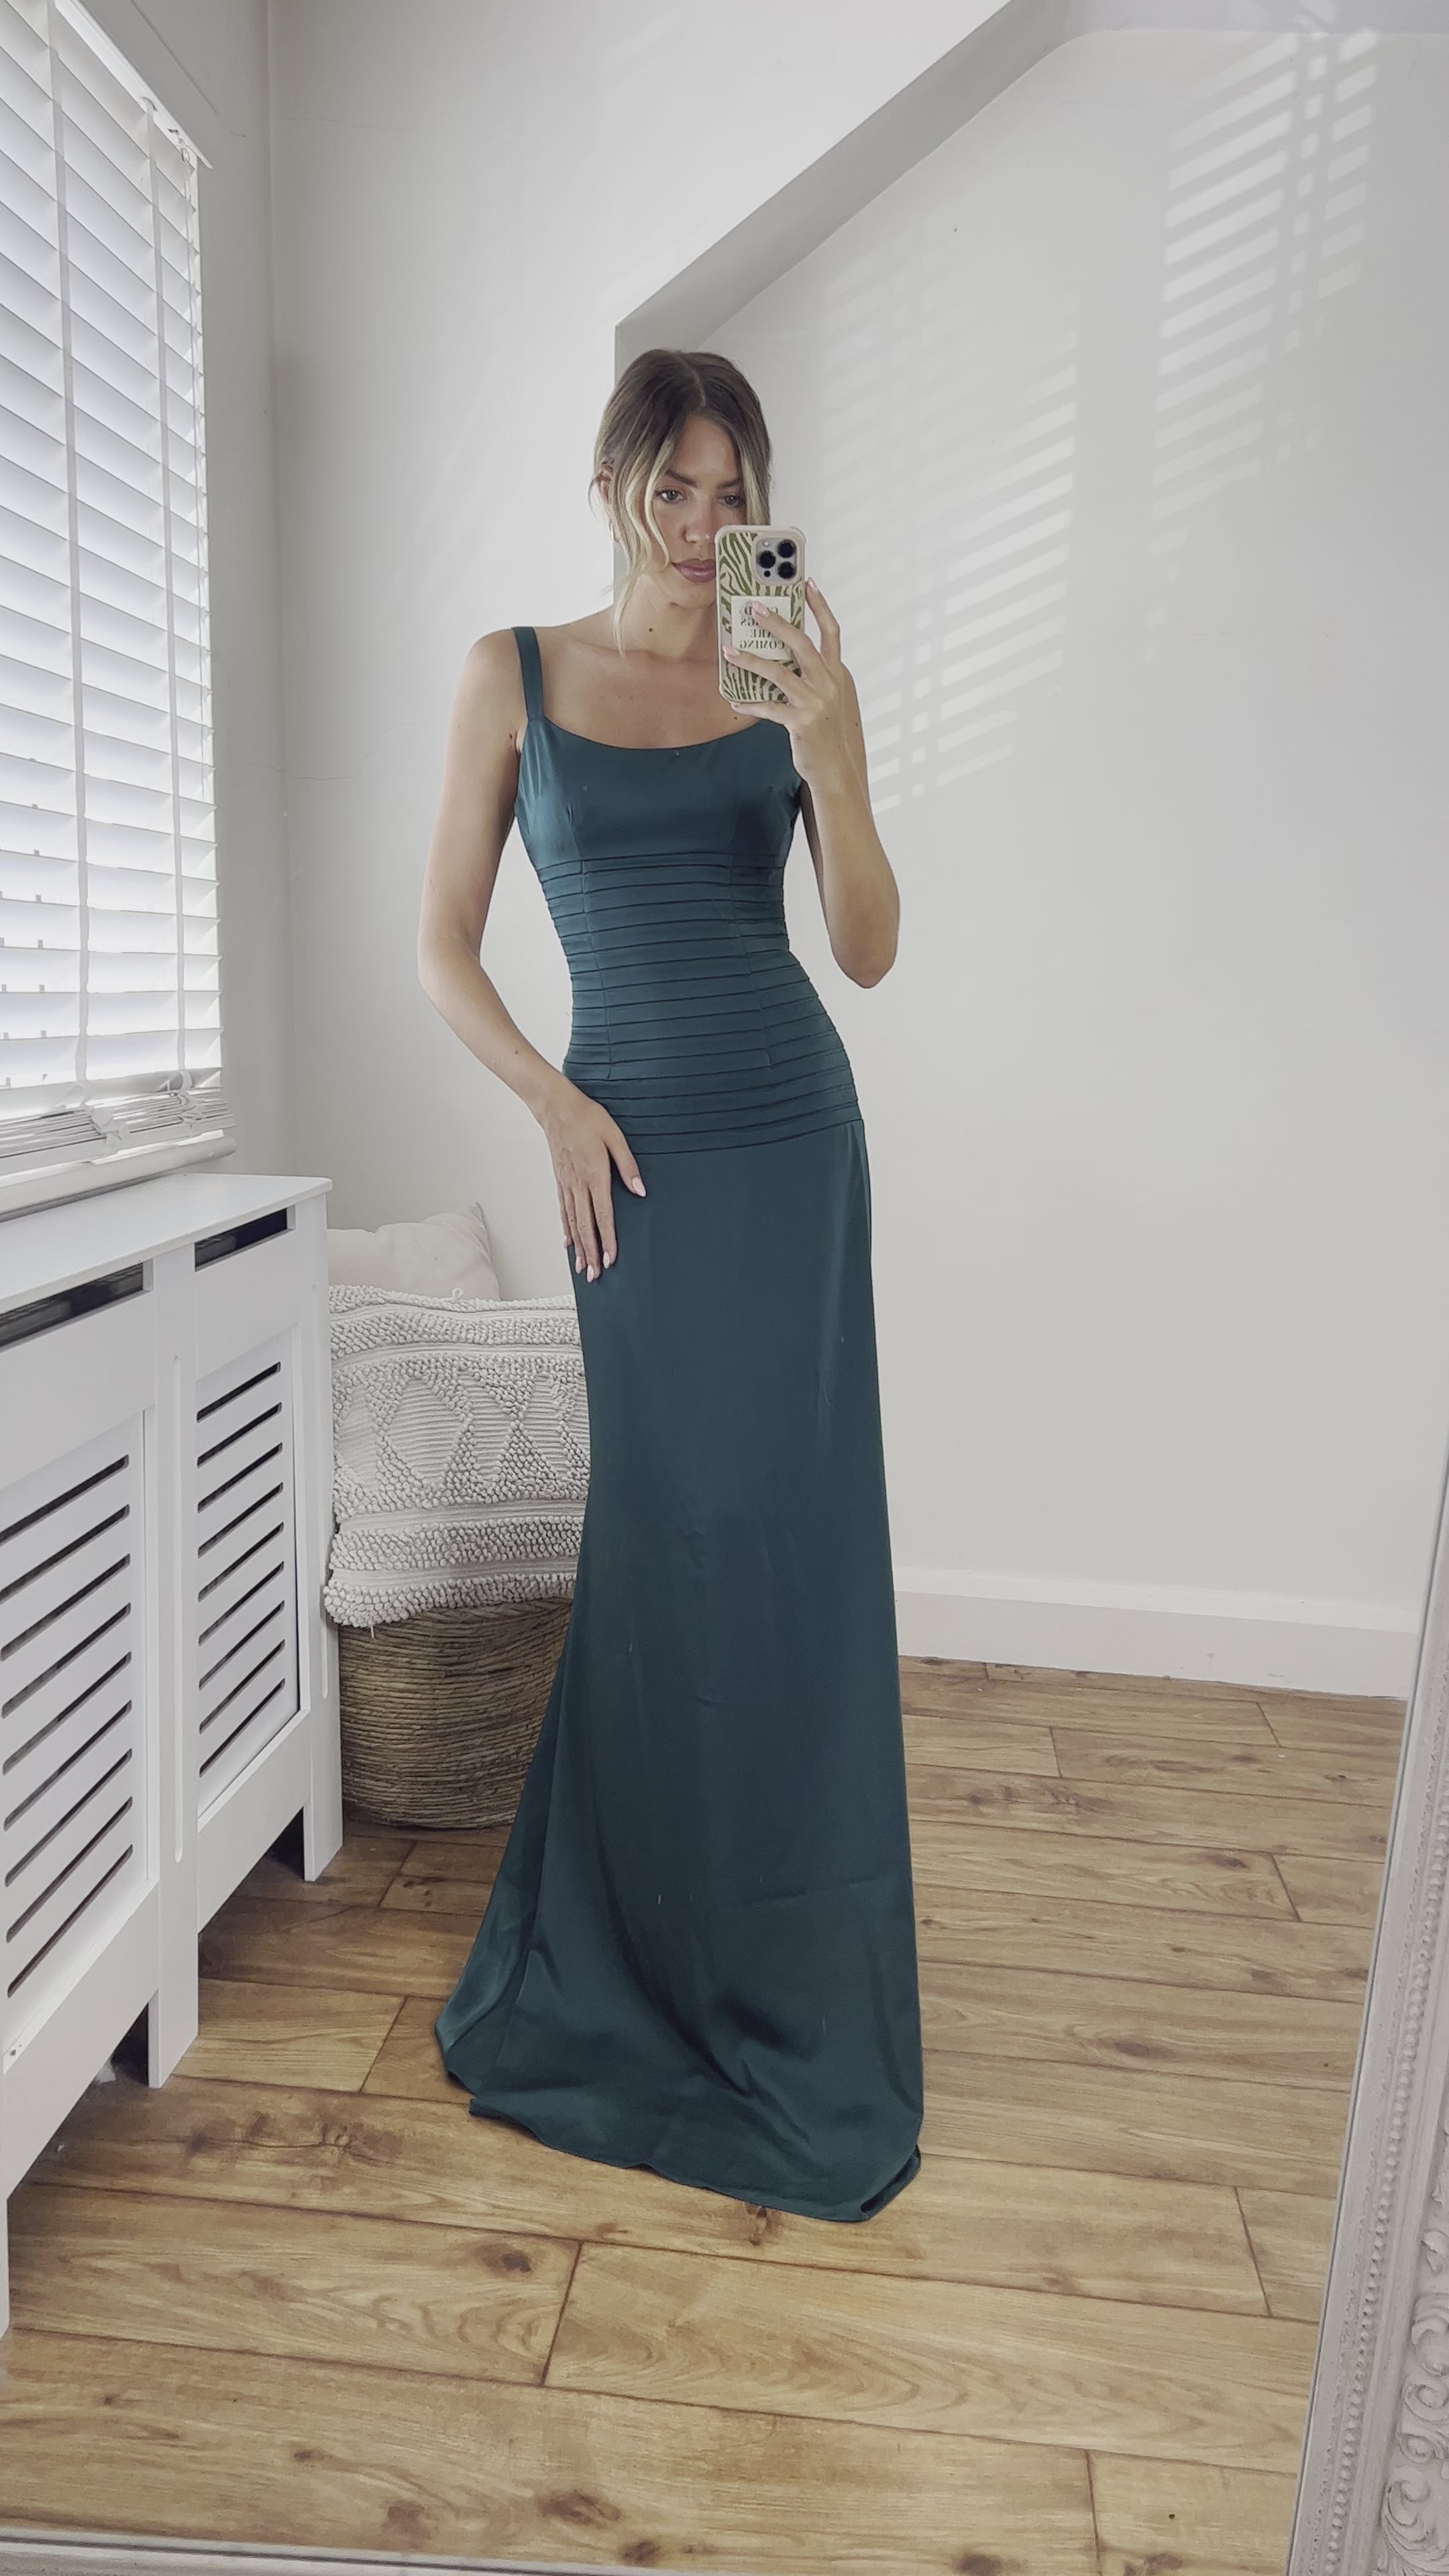 Catherine Fitted Corset Premium Satin Pin-tuck Design Lace Up Back Full Length Dress In Emerald Green